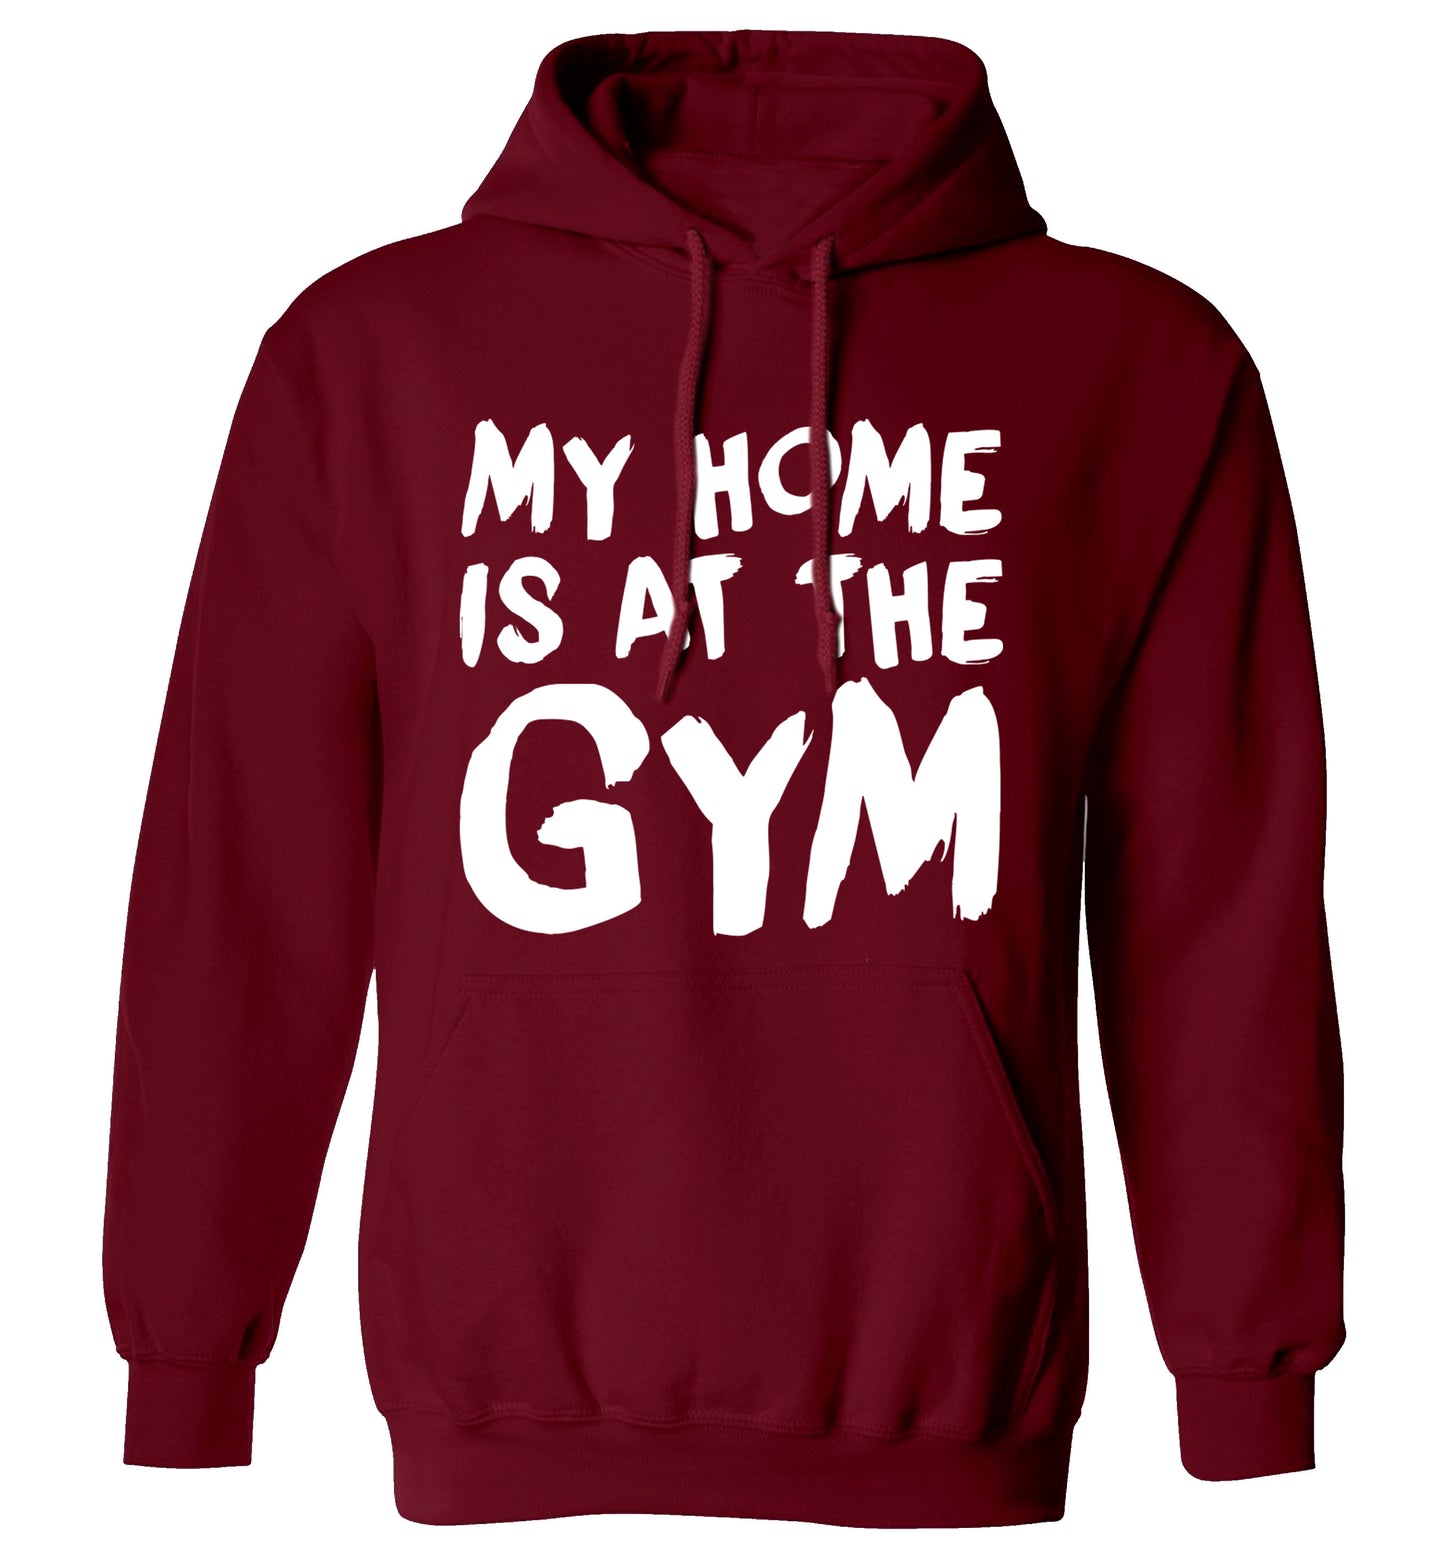 My home is at the gym adults unisex maroon hoodie 2XL